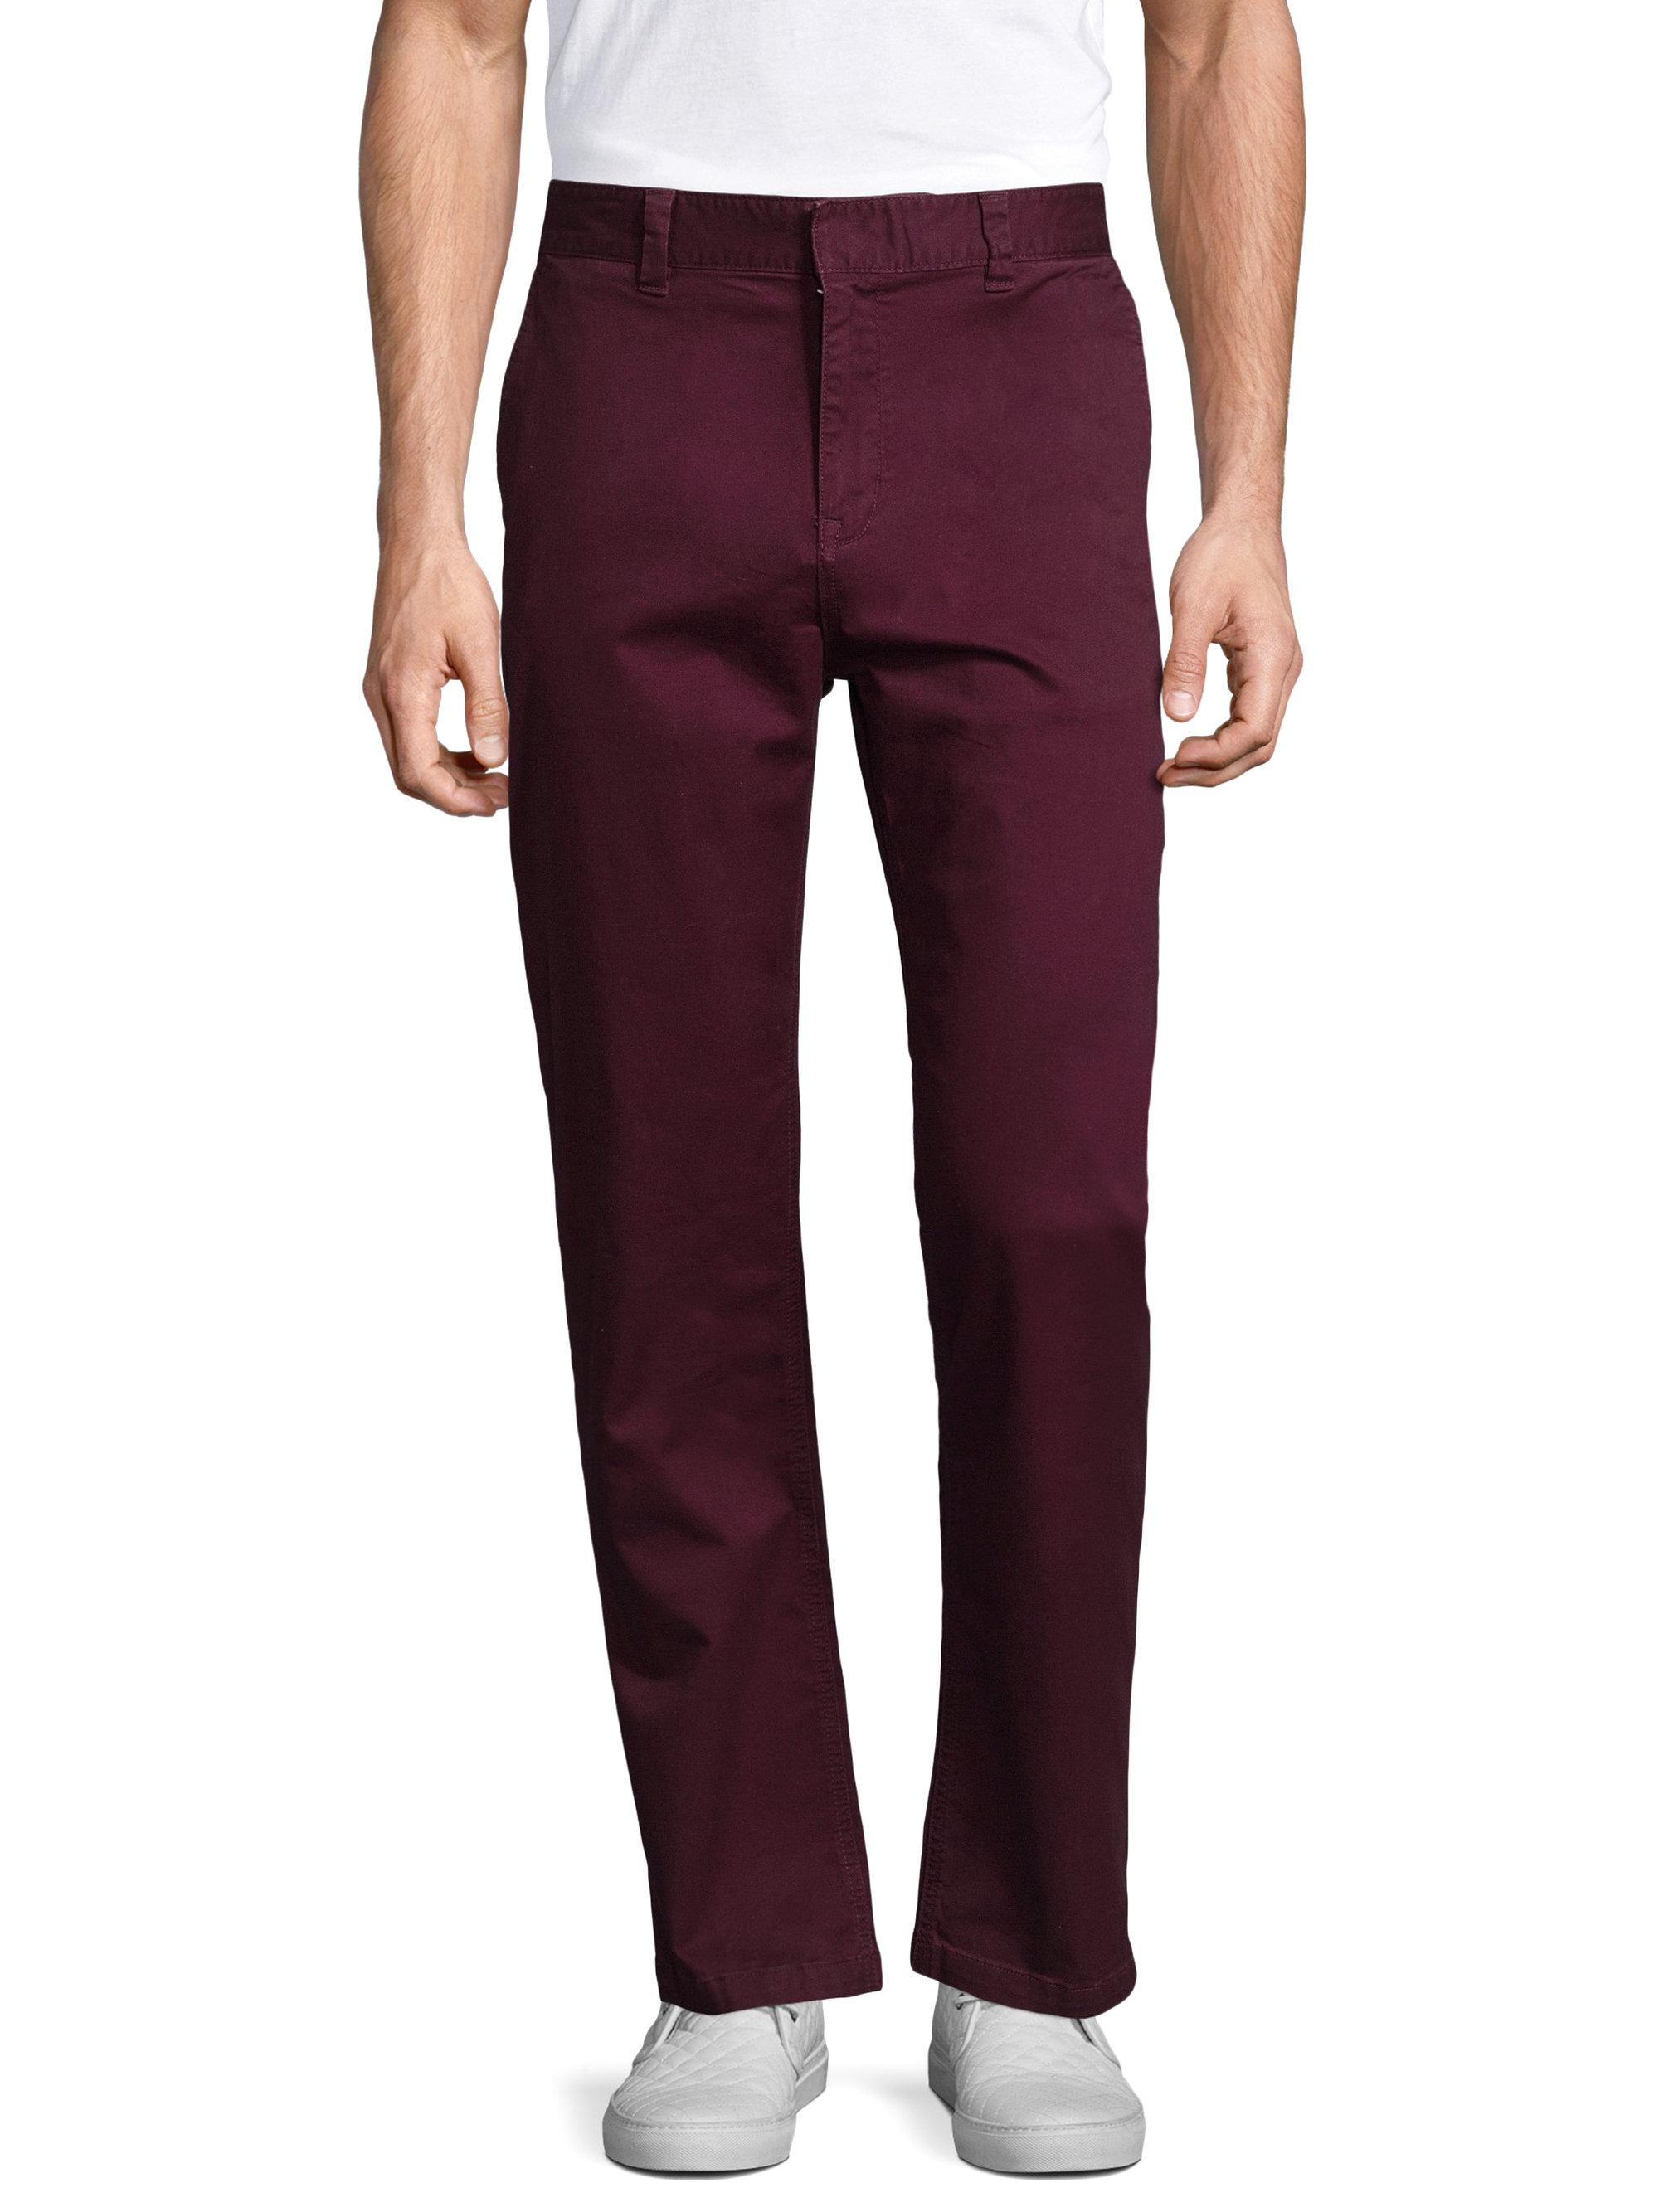 Lyst - Wesc Eddy Slim Straight Chino Pants in Red for Men